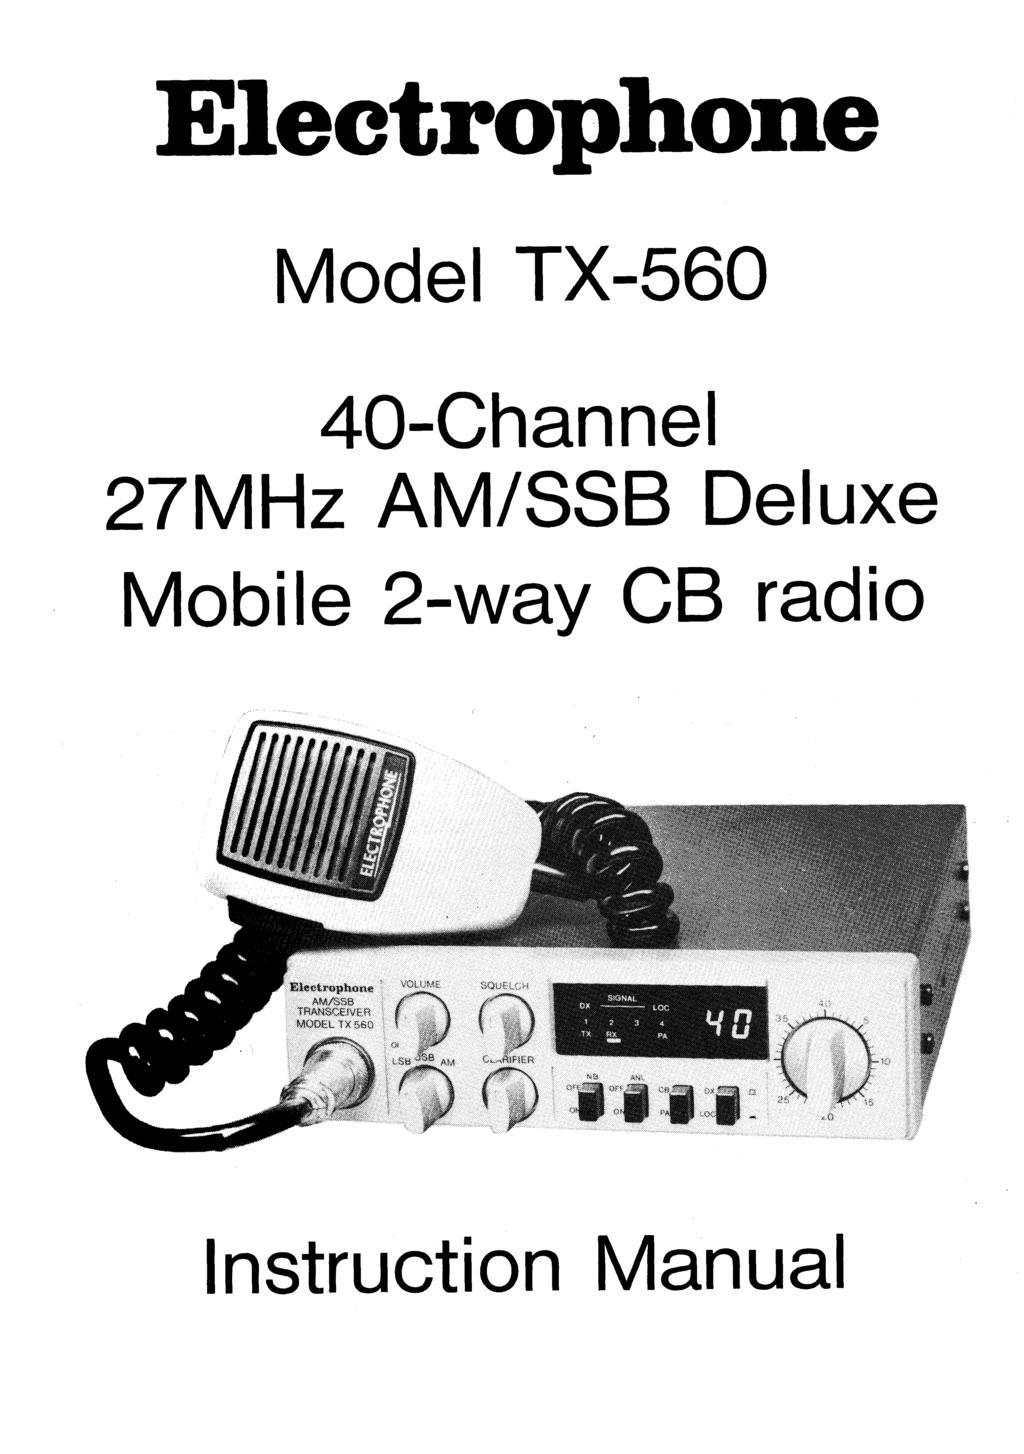 Electrophone Model TX-560 40-Channel 27MHz AM/SSB Deluxe Mobile